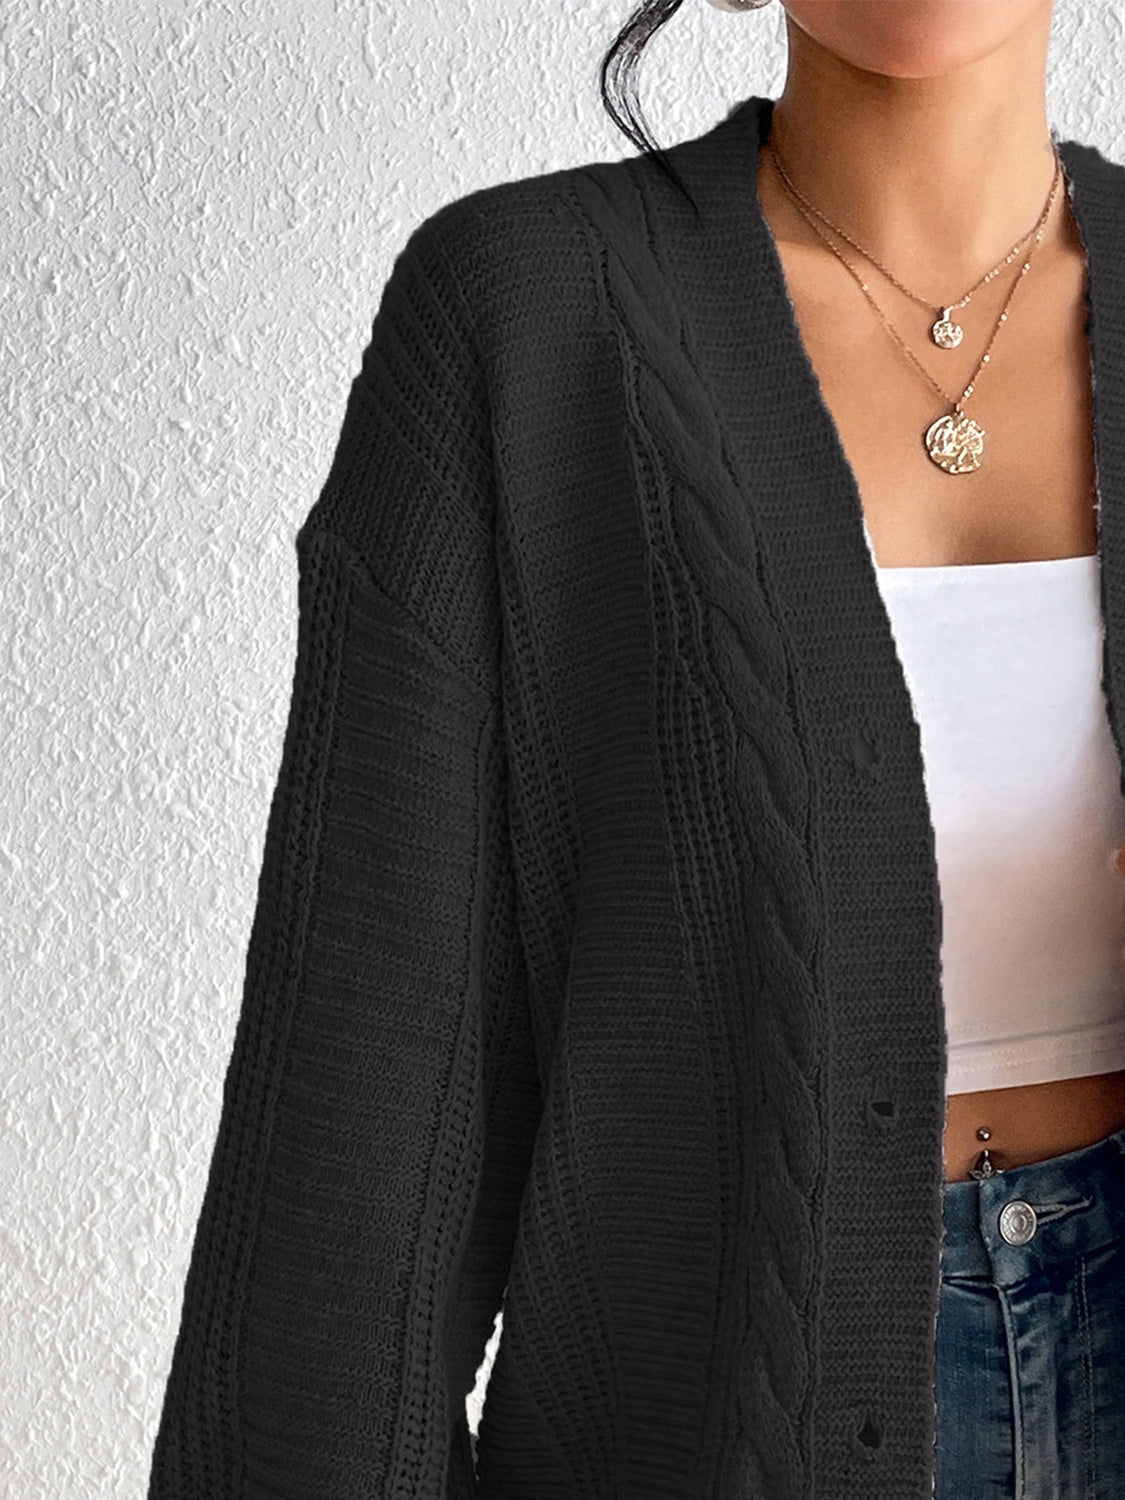 Cable-Knit Button Down Cardigan - Women’s Clothing & Accessories - Shirts & Tops - 5 - 2024